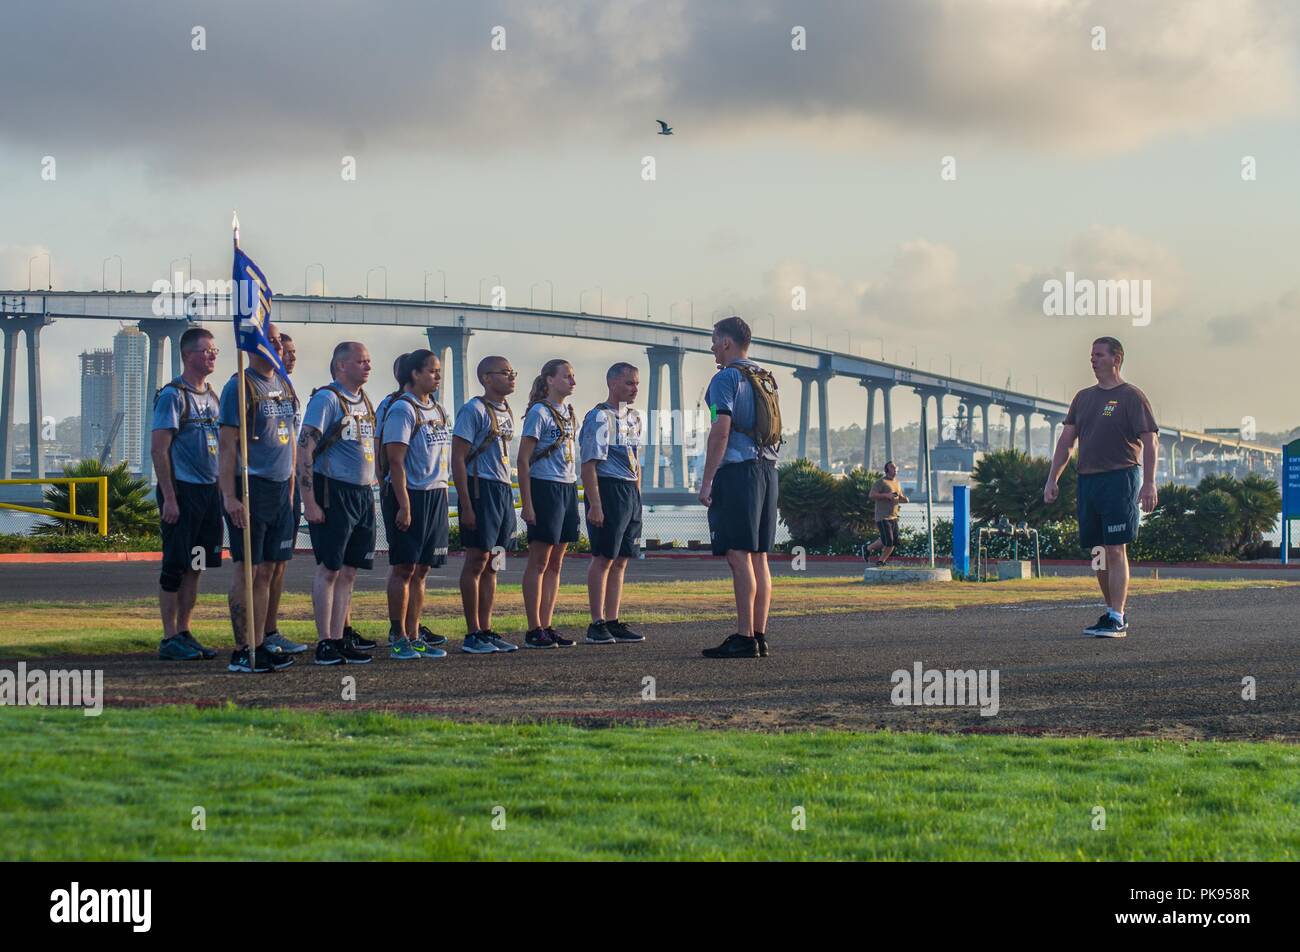 180813-N-NT795-840 CORONADO, Calif. (August 13, 2018) Chief Master-at-Arms Douglas Dawson assigned to Coastal Riverine Group (CRG) 1, leads the basic formation drill to chief petty officer (CPO) selectees during CPO initiation onboard Naval Amphibious Base Coronado, August 13, 2018. CPO initiation is a professional education and training environment that starts when the announcement message is released, and time-honored tradition focused on the team/individuals as leaders of integrity, accountability, initiative and toughness. (U.S. Navy photo by Chief Boatswain's Mate Nelson Doromal Jr/Releas Stock Photo